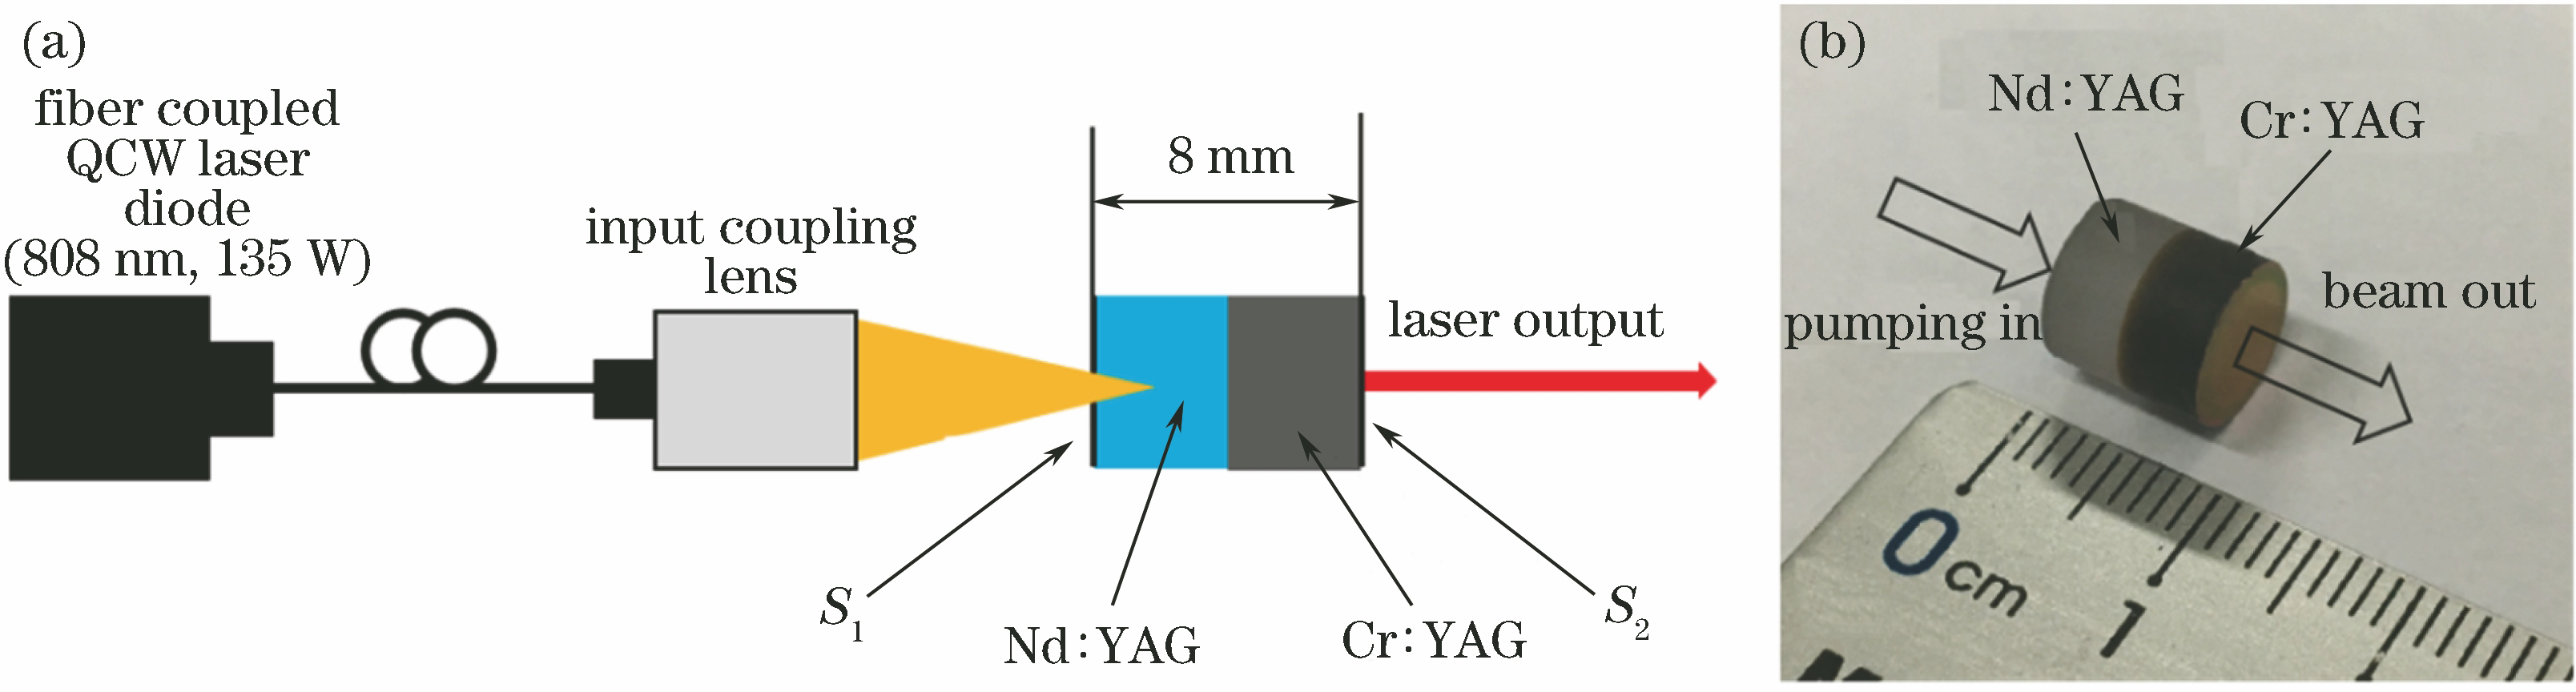 Schematic of laser and gain media. (a) Schematic of composite Nd∶YAG/Cr∶YAG monolithic laser; (b) Nd∶YAG gain media bounded with Cr∶YAG saturable absorber